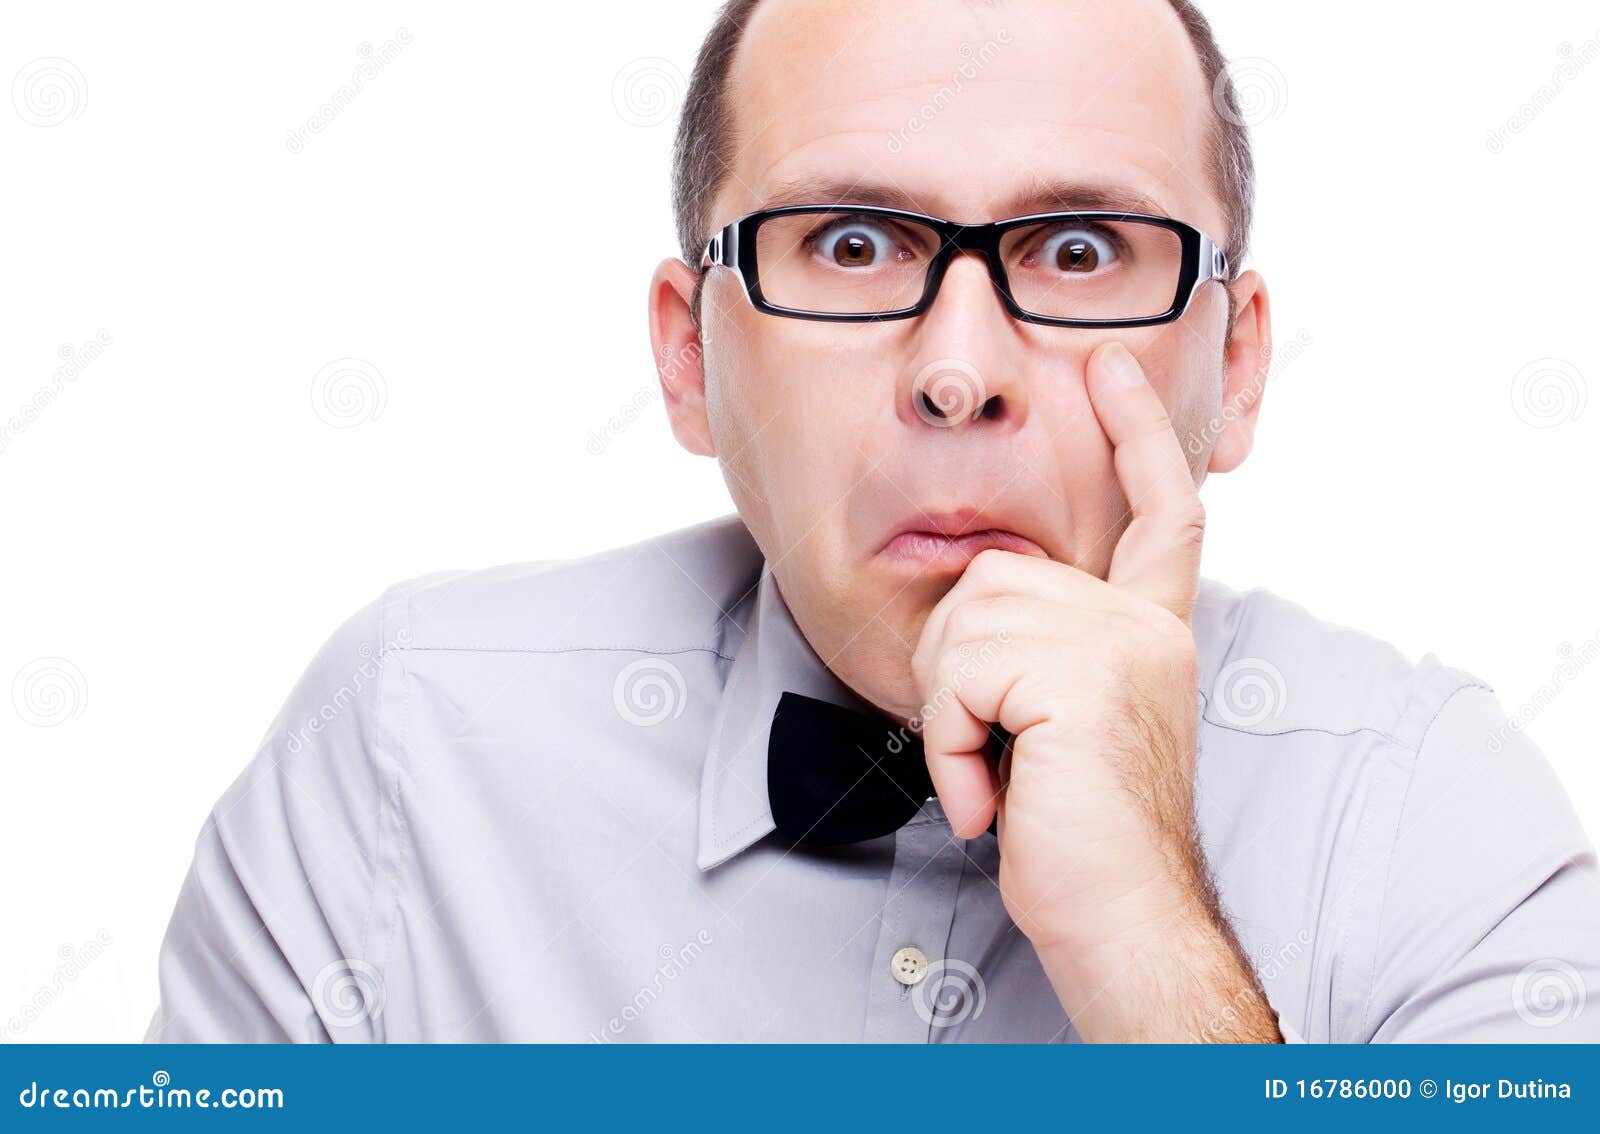 Confused businessman stock photo. Image of stupid, confusion - 16786000